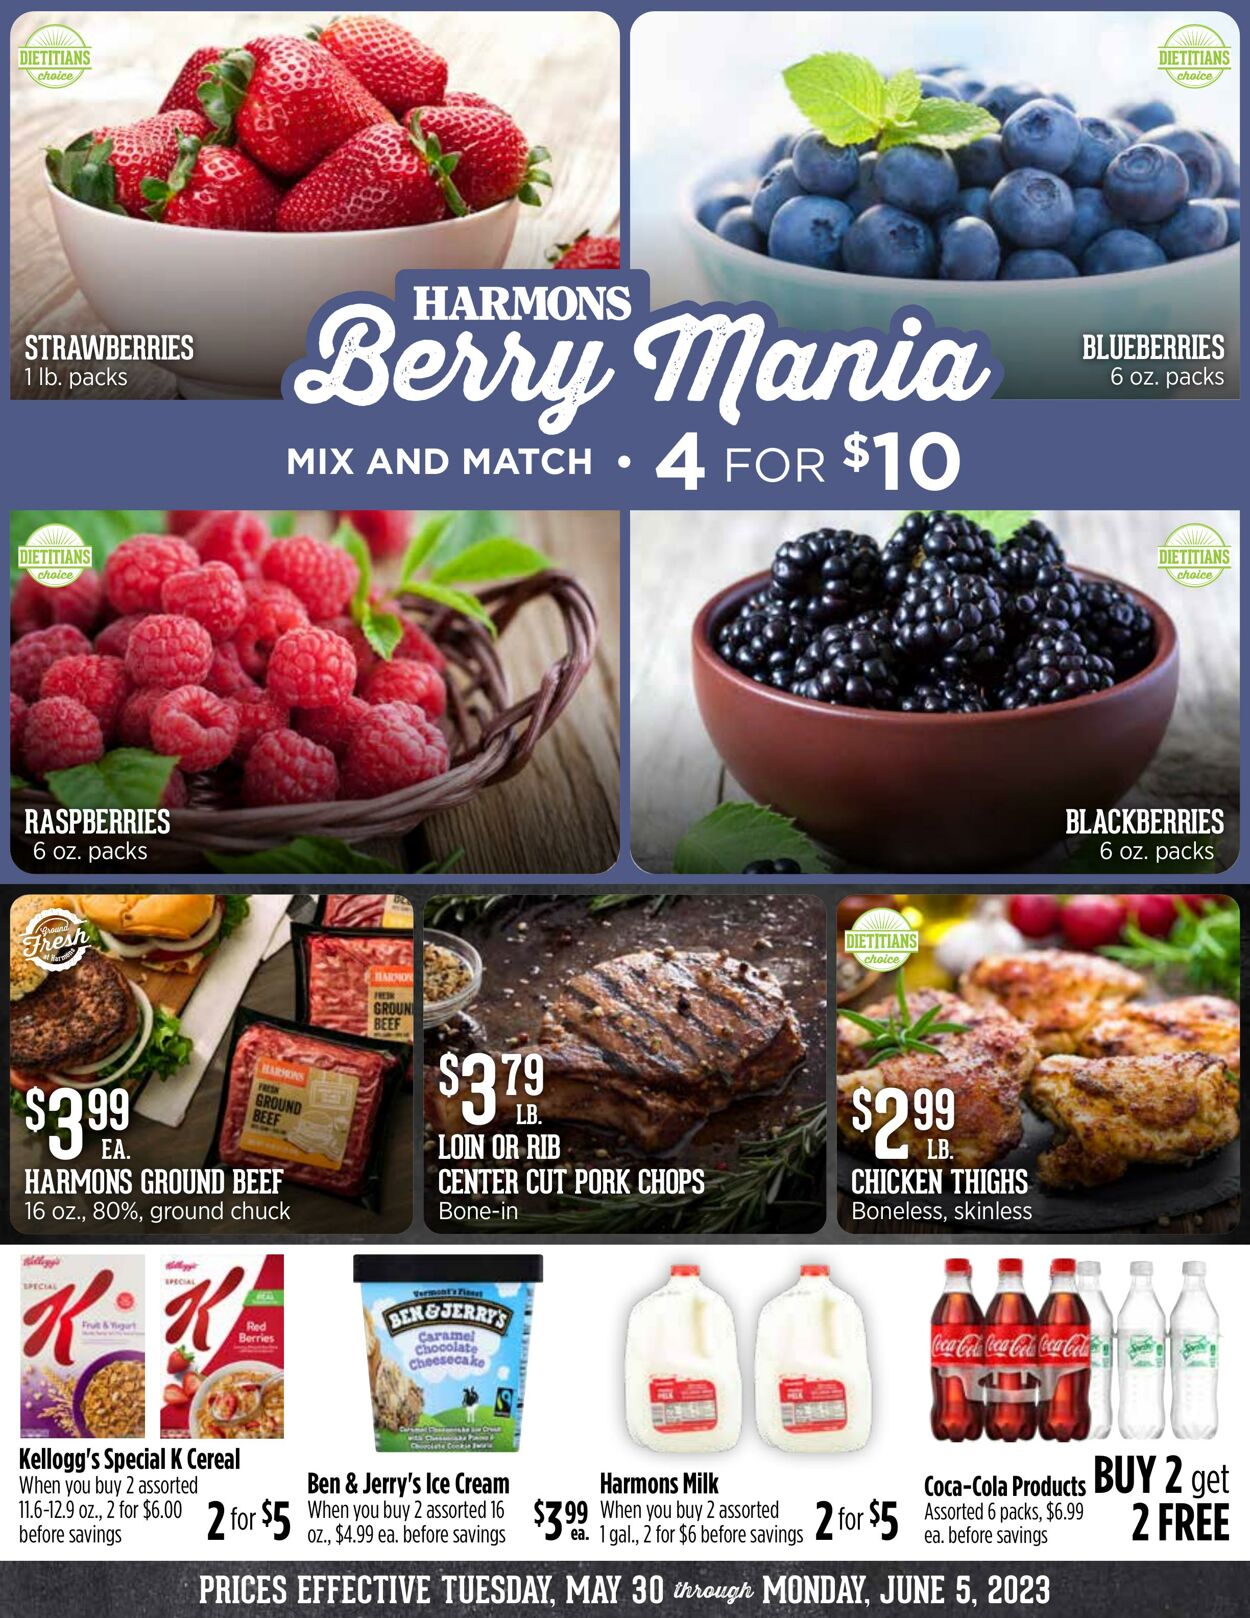 Harmons Grocery Promotional weekly ads